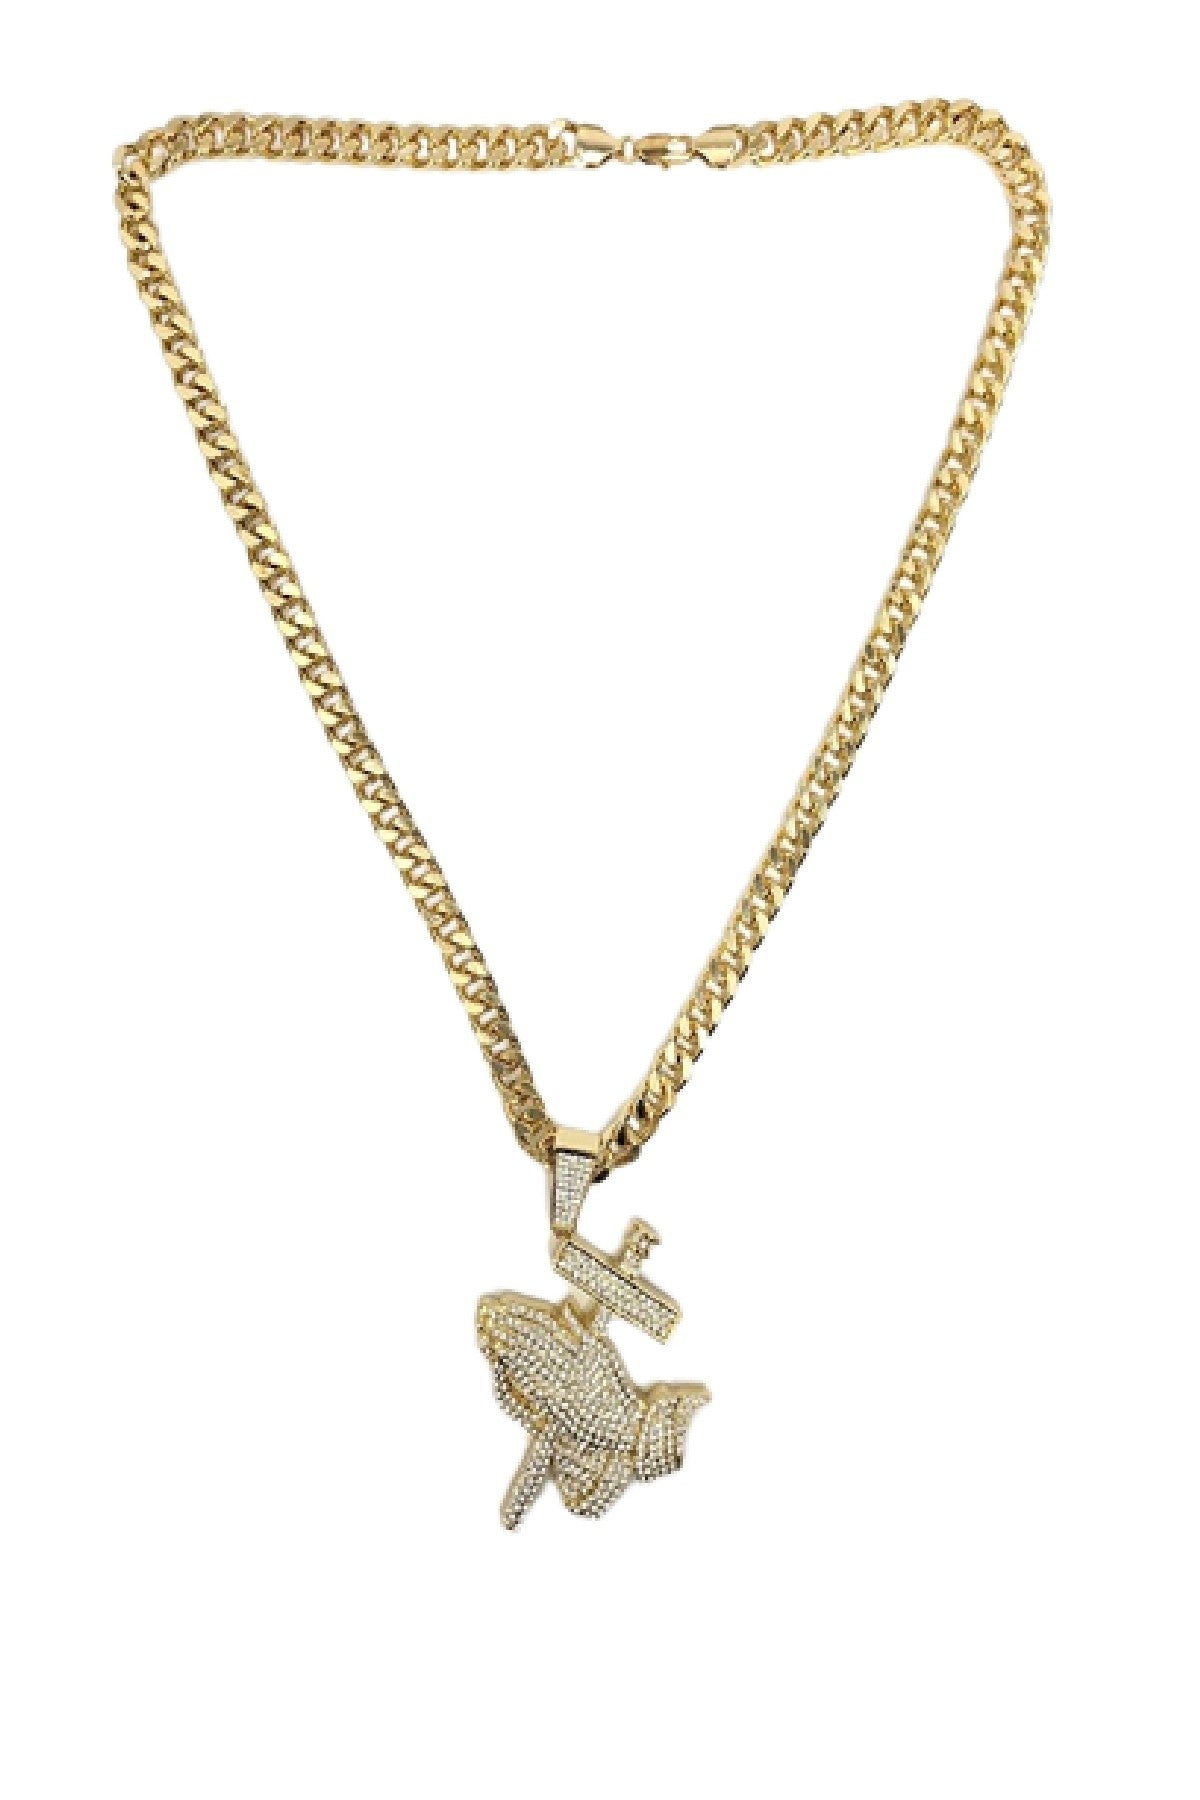 HIP HOP ICED OUT PRAYING HANDS PENDANT CUBAN CHAIN